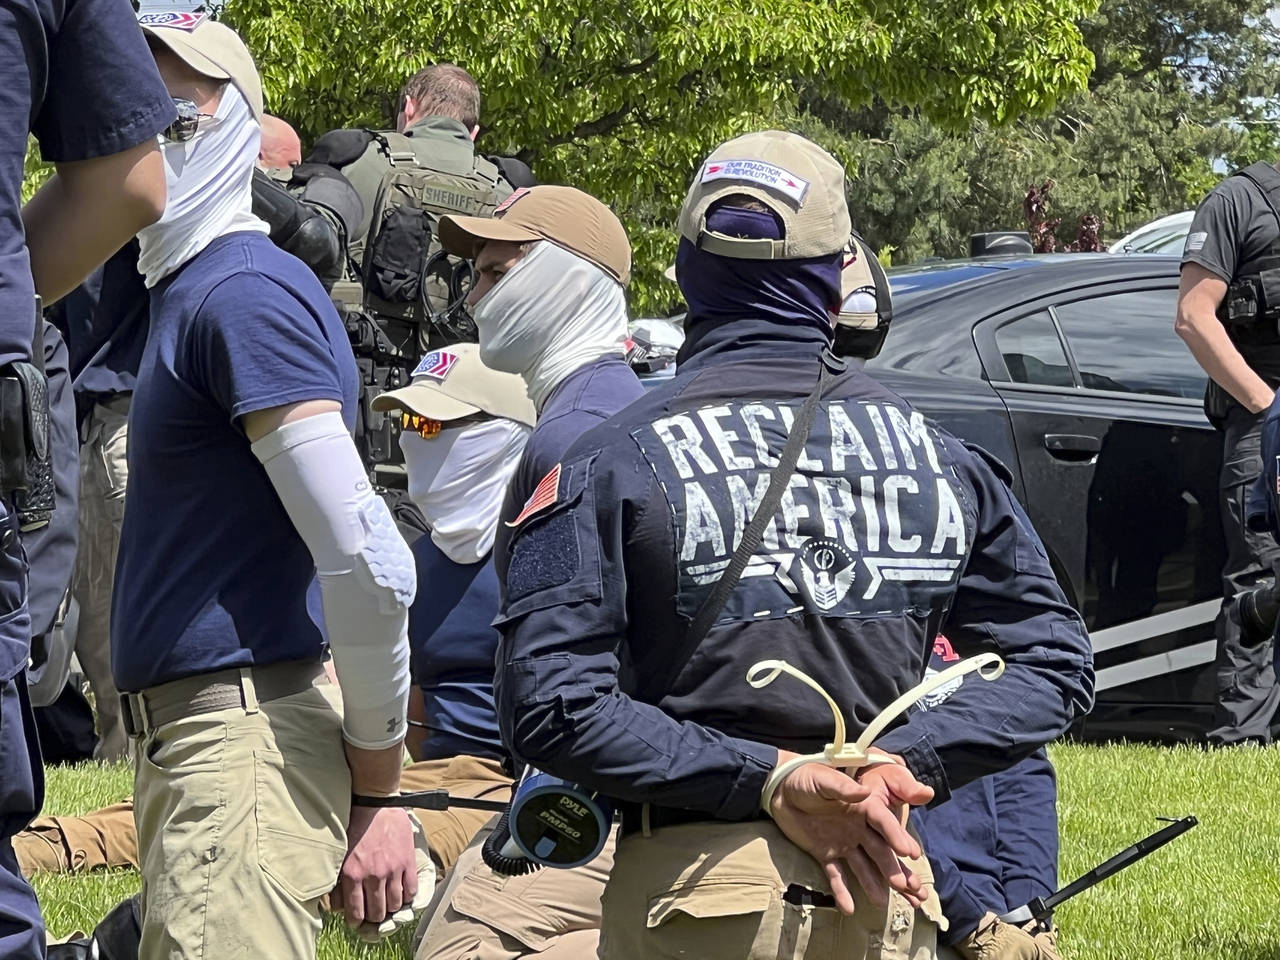 Authorities arrest members of the white supremacist group Patriot Front near an Idaho pride event S...